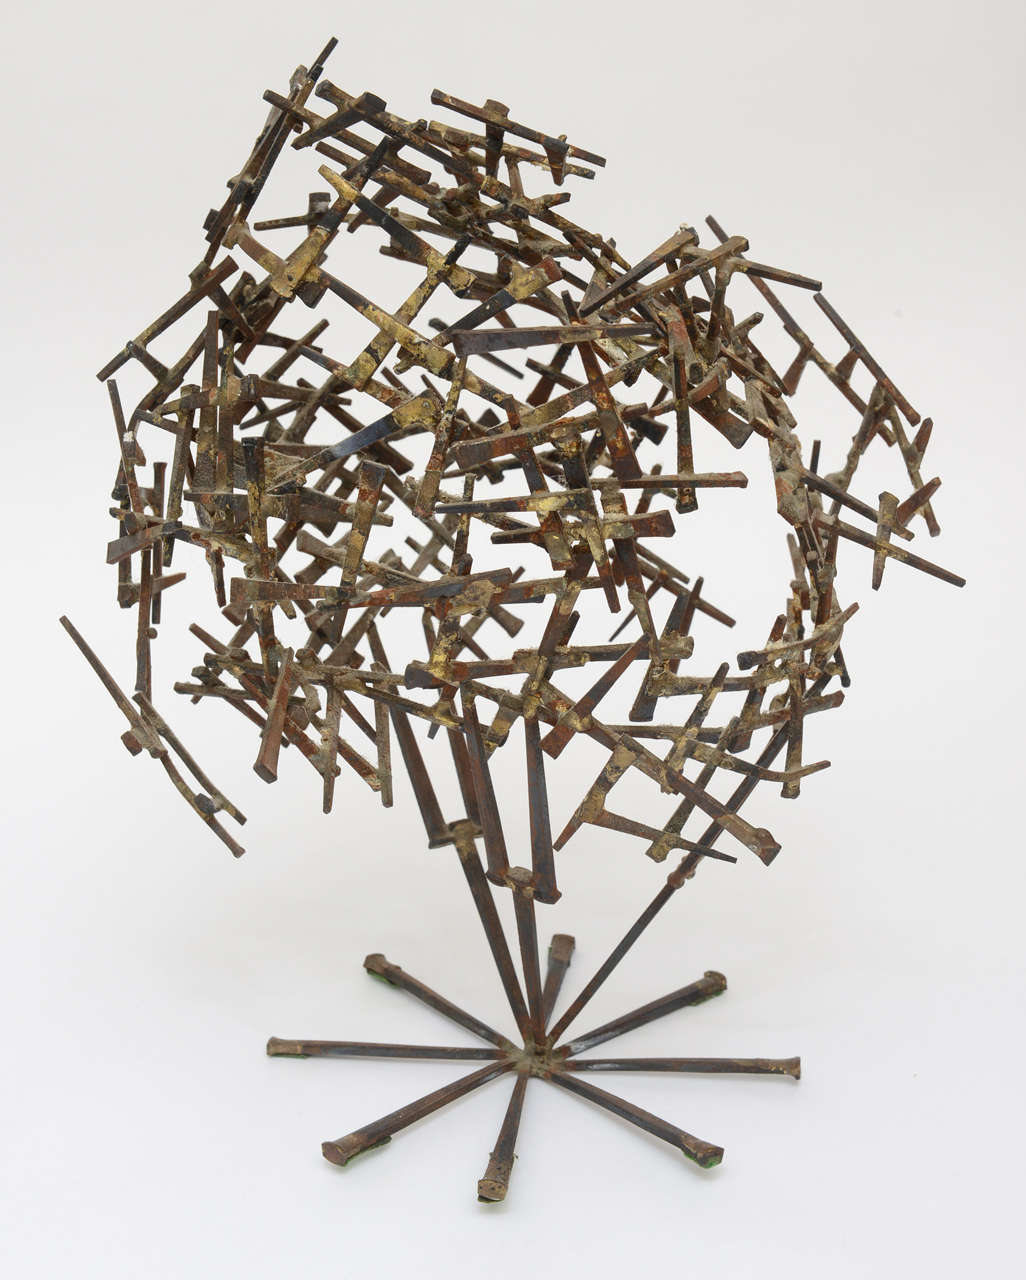 Gilded cement nails going in all directions make this one of a kind tabletop Brutalist abstract sculpture interesting. it looked like a globe where to go and in which direction; an abstraction indeed! One can attribute this in so many ways. The